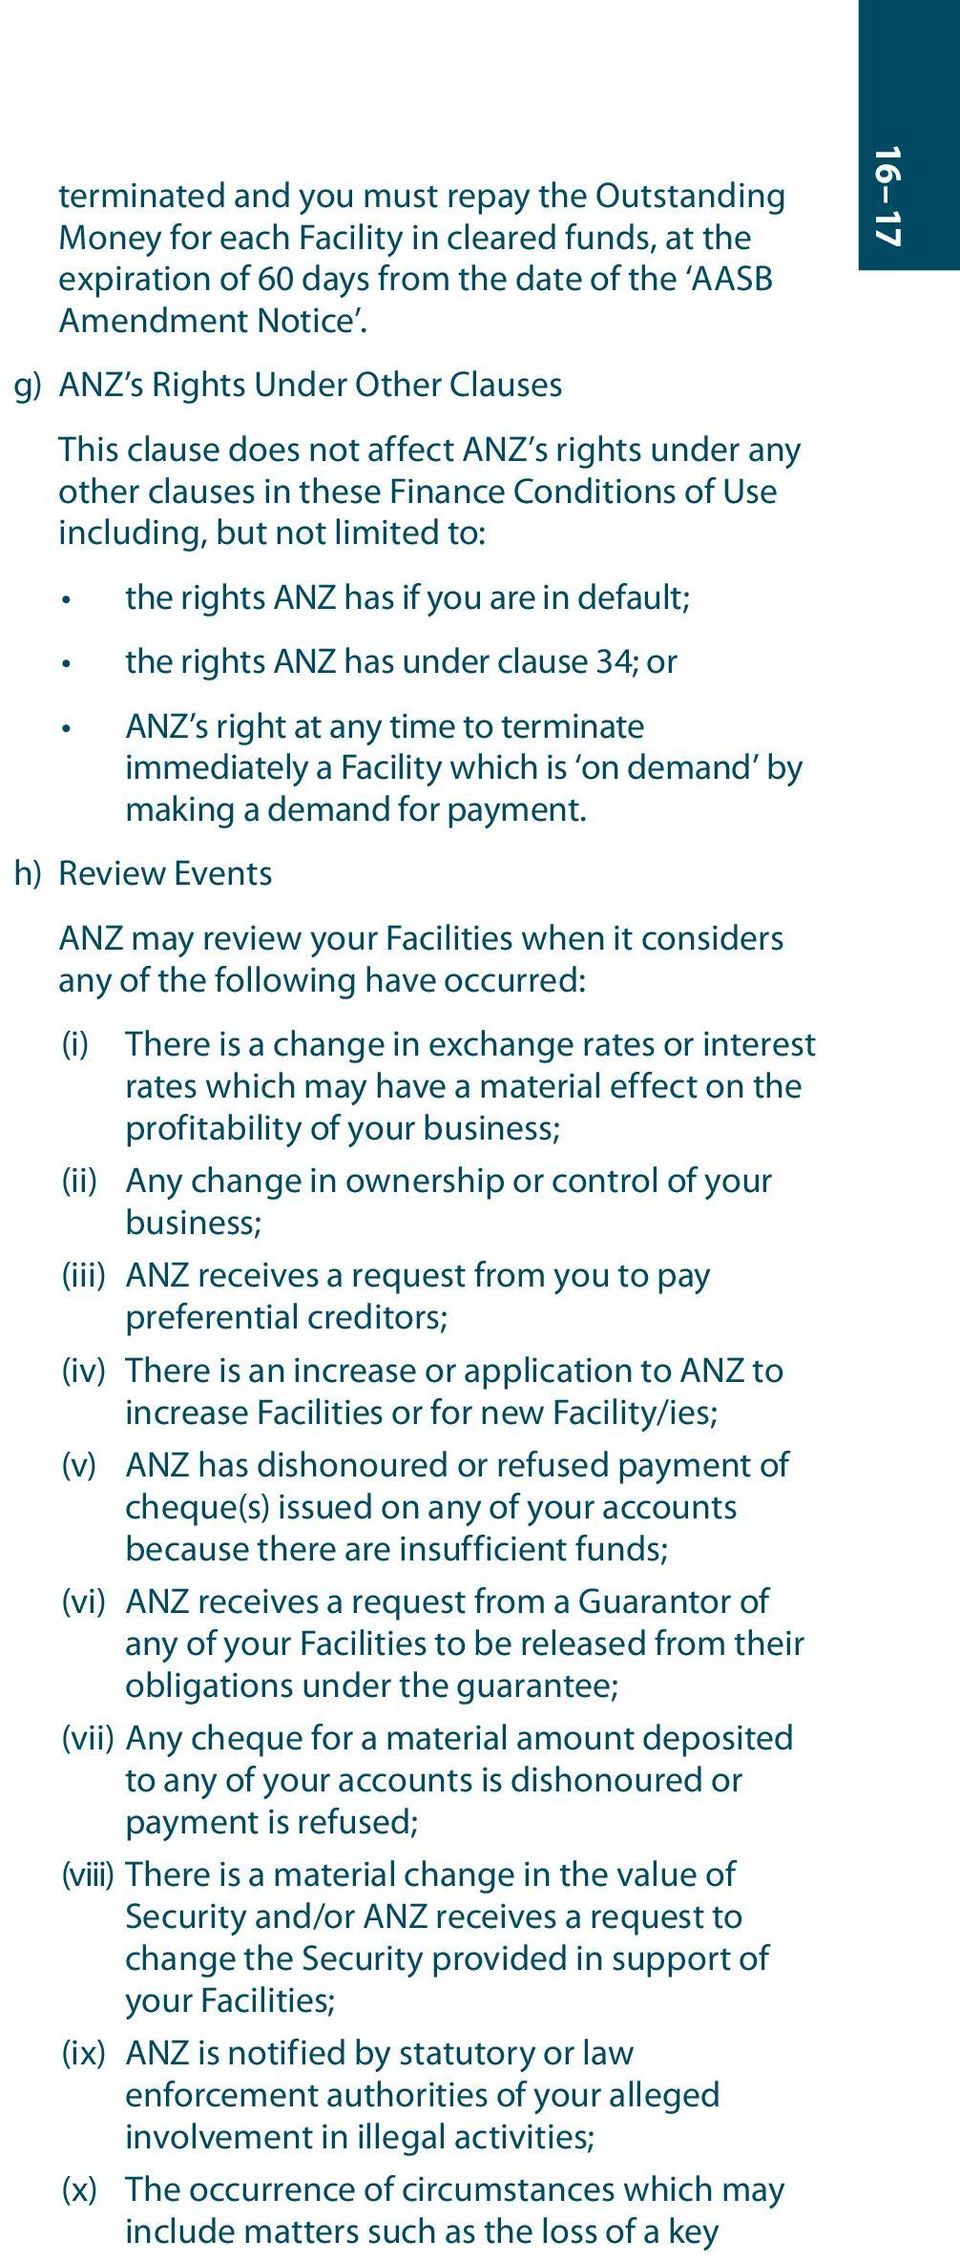 are in default; the rights ANZ has under clause 34; or ANZ s right at any time to terminate immediately a Facility which is on demand by making a demand for payment.